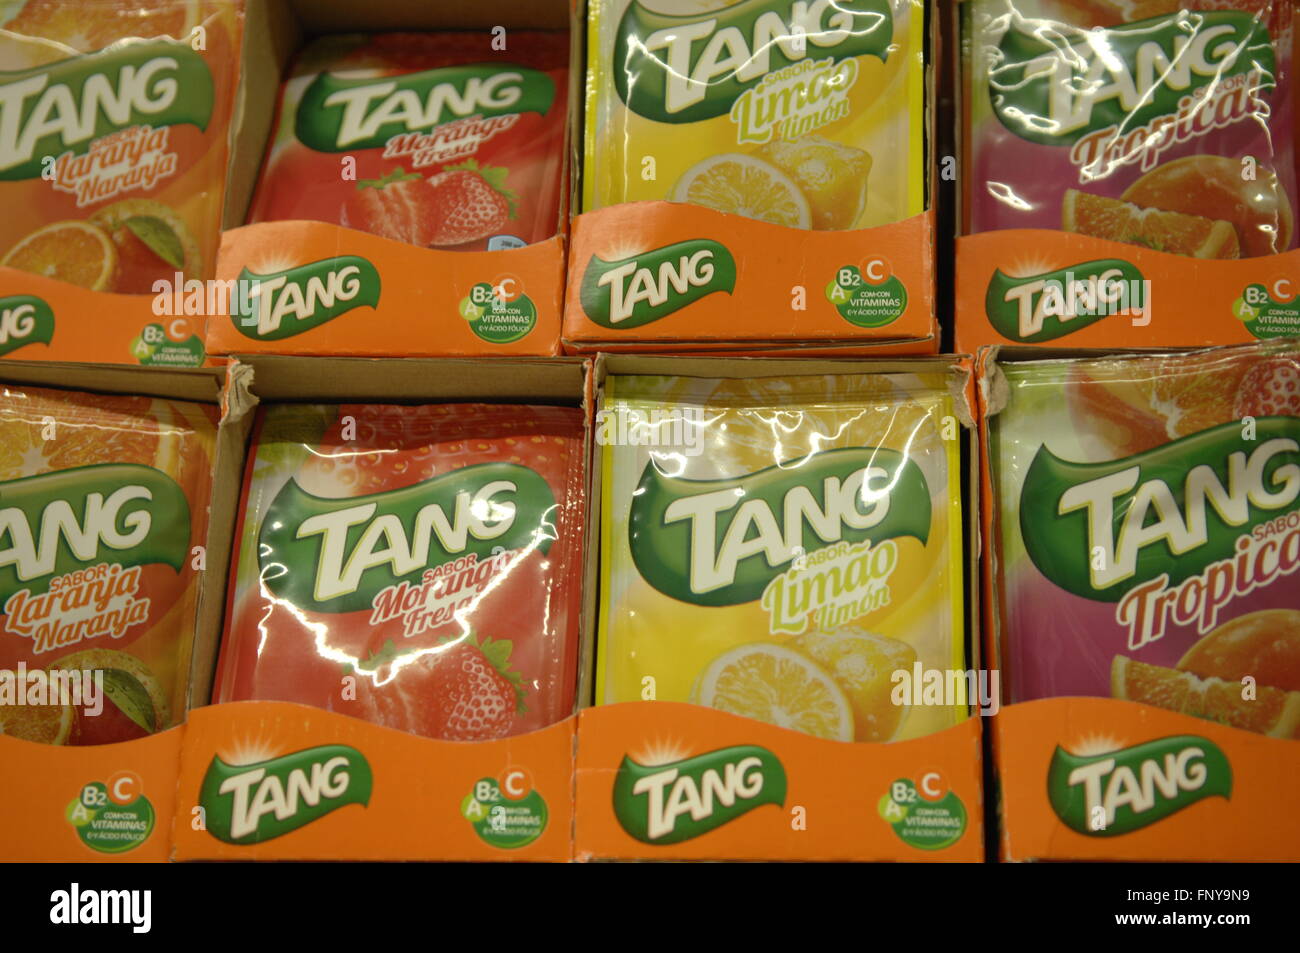 Tang fruit-flavored drink from a brand name of instant fruit flavored  drinks owned by Mondelēz International Stock Photo - Alamy